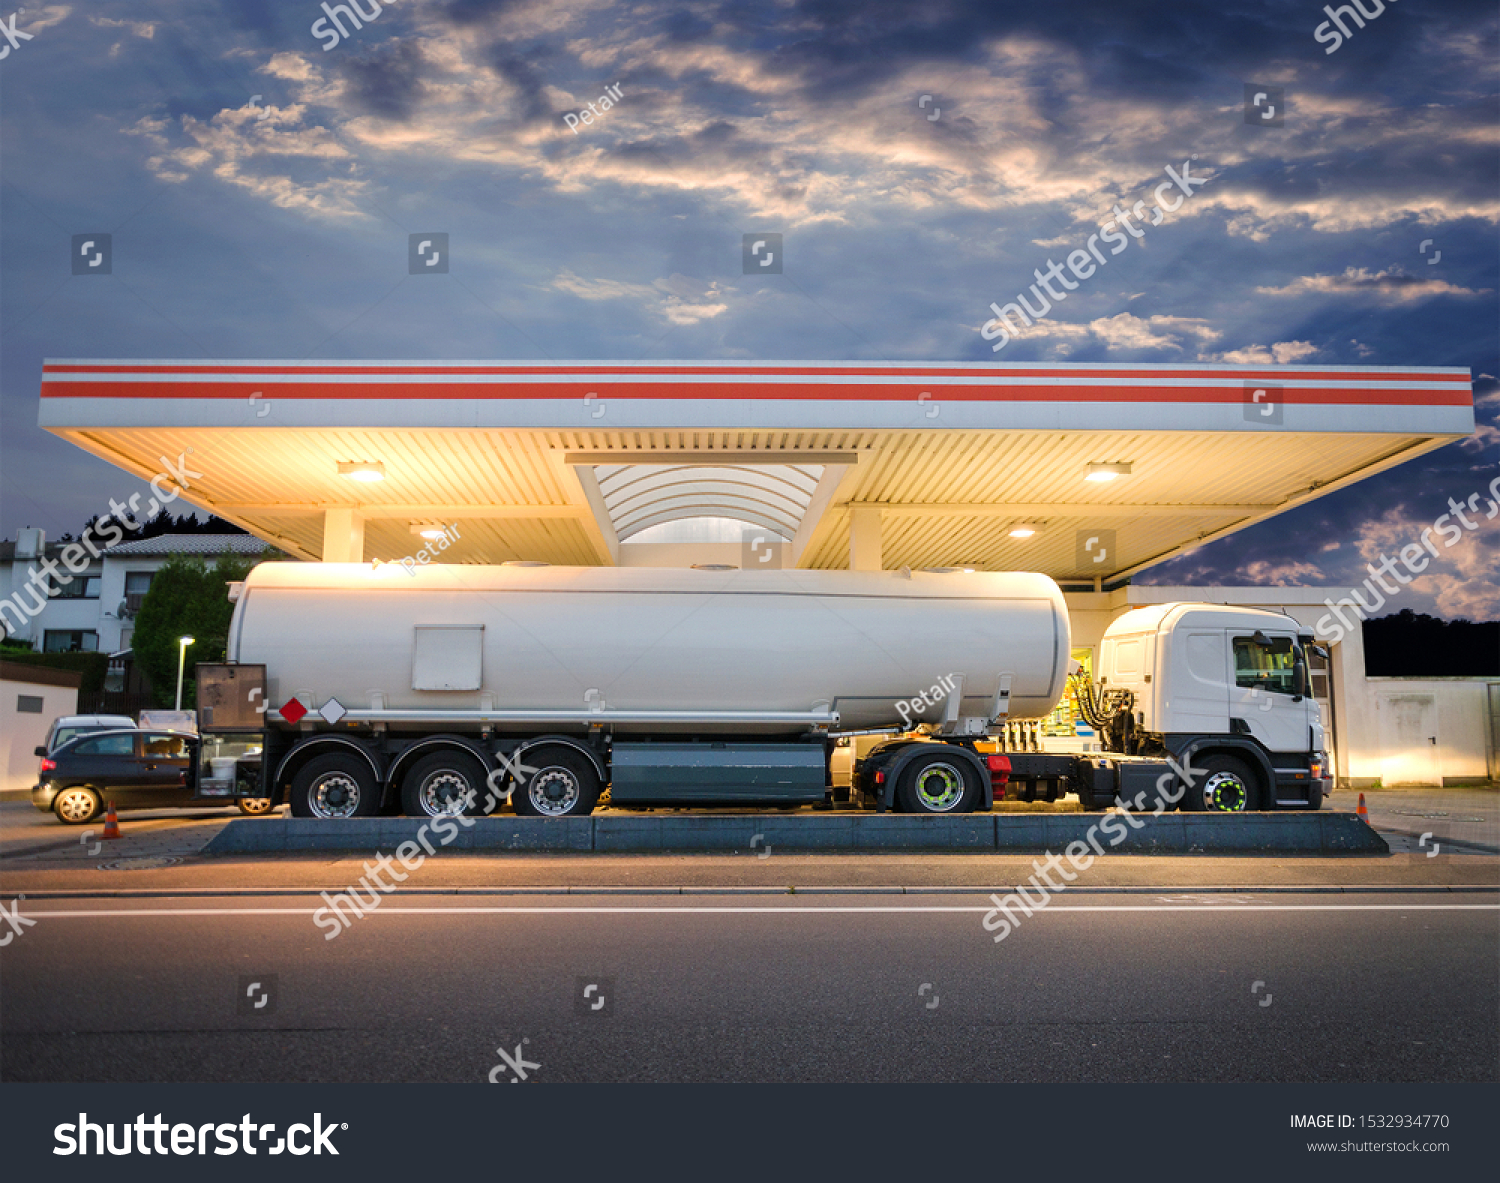 Tanker gas truck delivering fuel at service station against dramatic night sky #1532934770